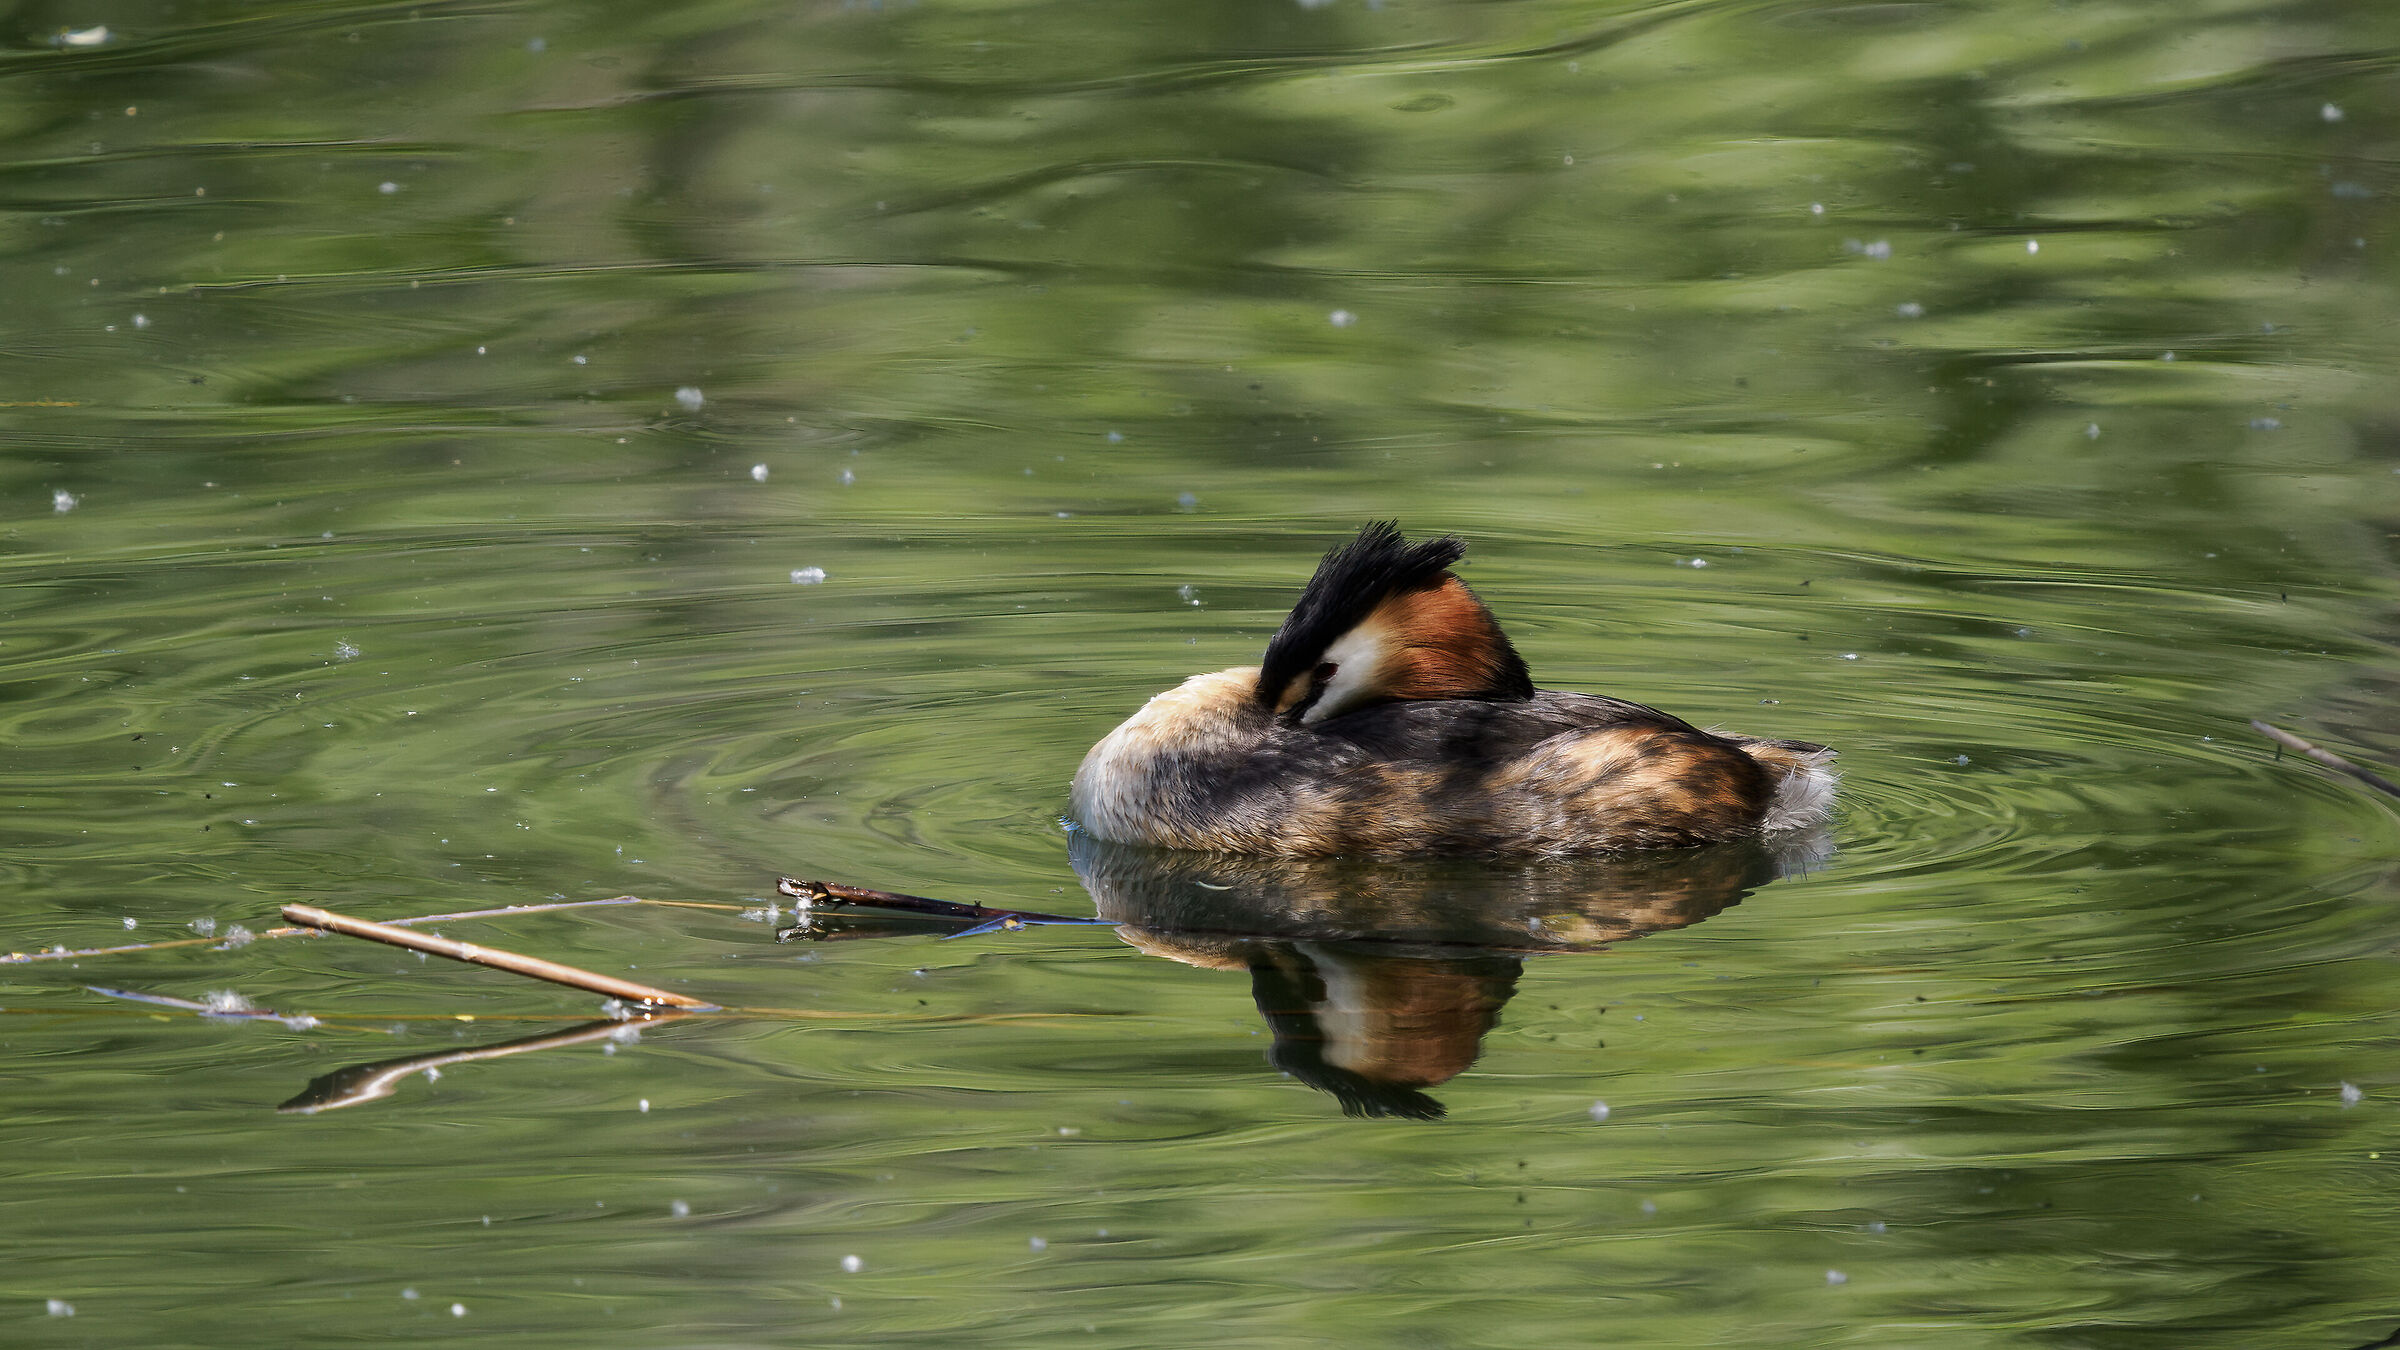 The rest of the grebe...